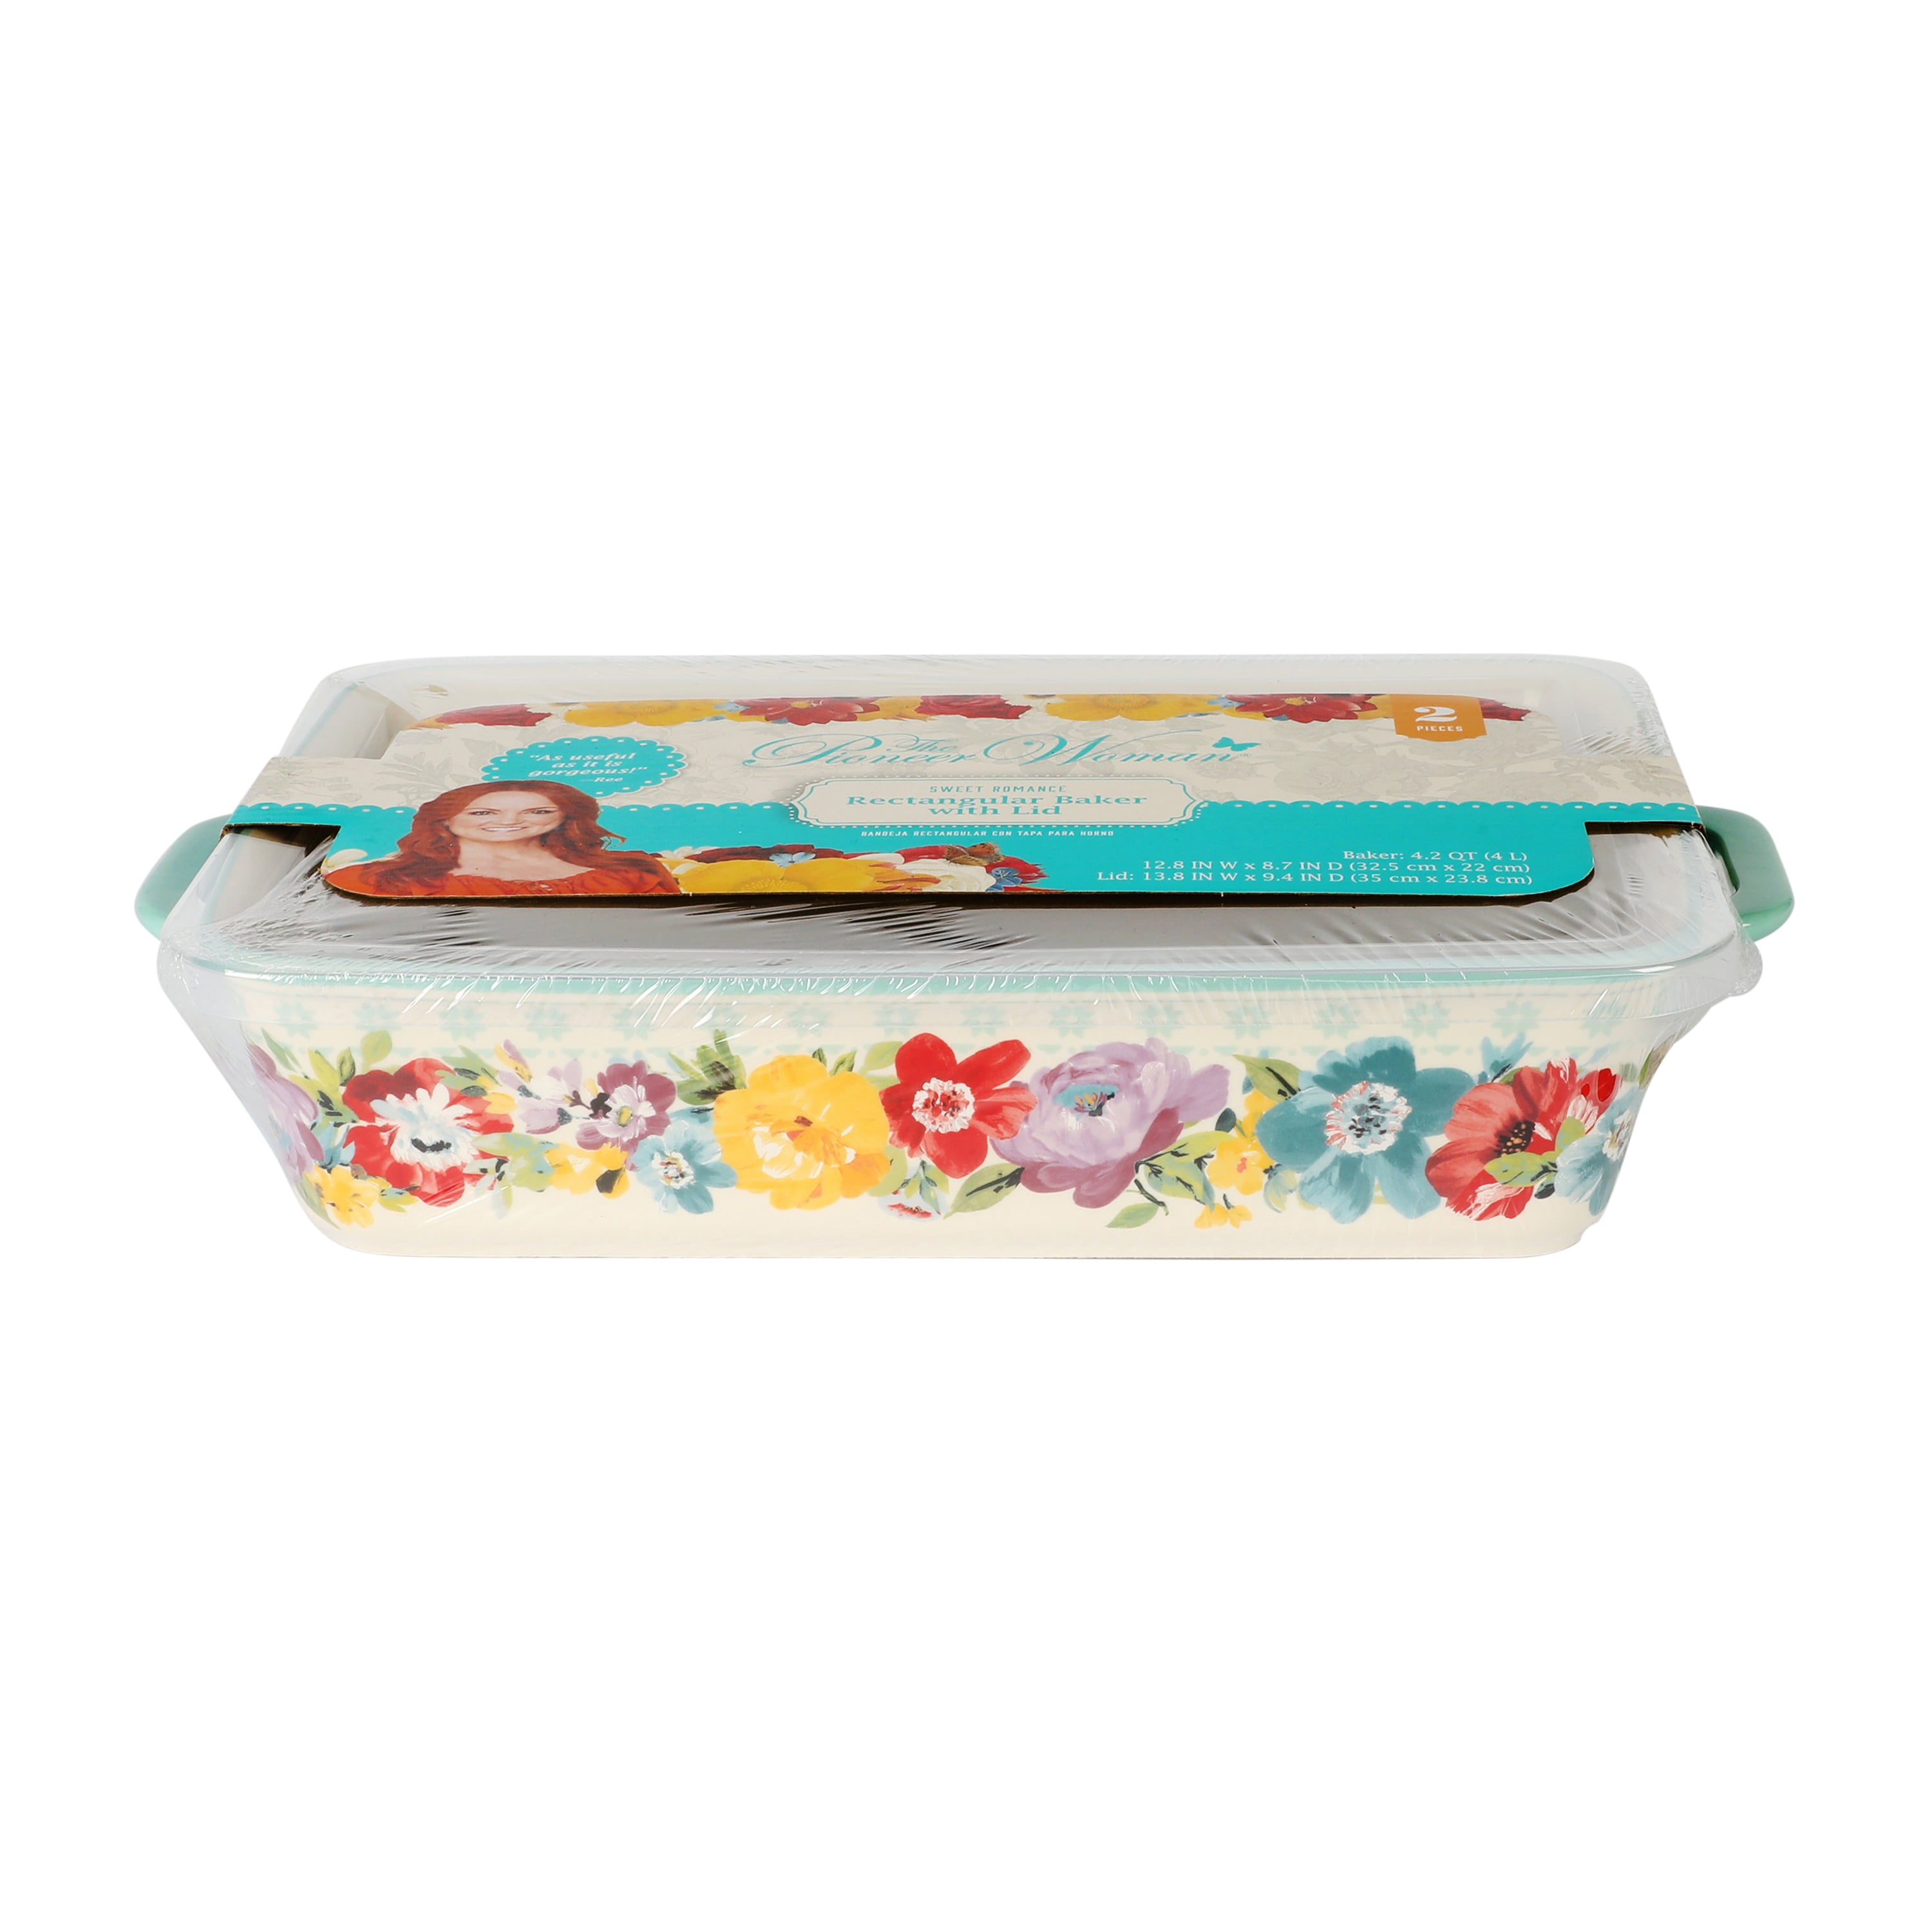 The Pioneer Woman Sweet Romance Cow Square Ceramic Baking Dish - Teal - 8 x 8 in